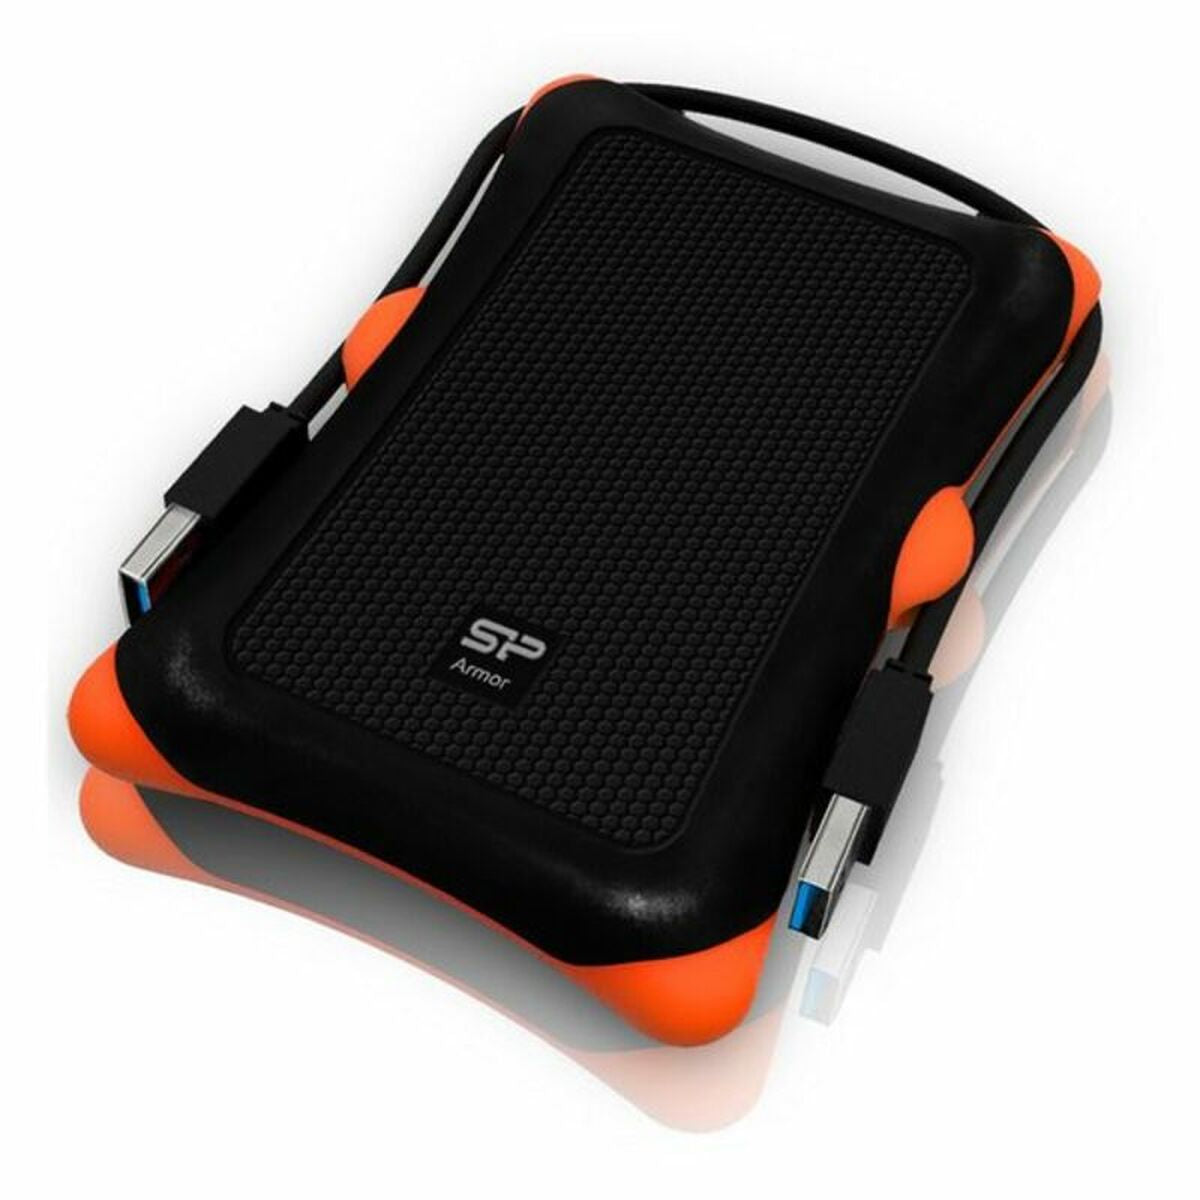 External Hard Drive Silicon Power FAEDDE0201 2 TB 2.5" USB 3.1, Silicon Power, Computing, Data storage, external-hard-drive-silicon-power-faedde0201-2-tb-2-5-usb-3-1, Brand_Silicon Power, category-reference-2609, category-reference-2803, category-reference-2806, category-reference-t-19685, category-reference-t-19909, category-reference-t-21355, computers / components, Condition_NEW, Price_100 - 200, RiotNook